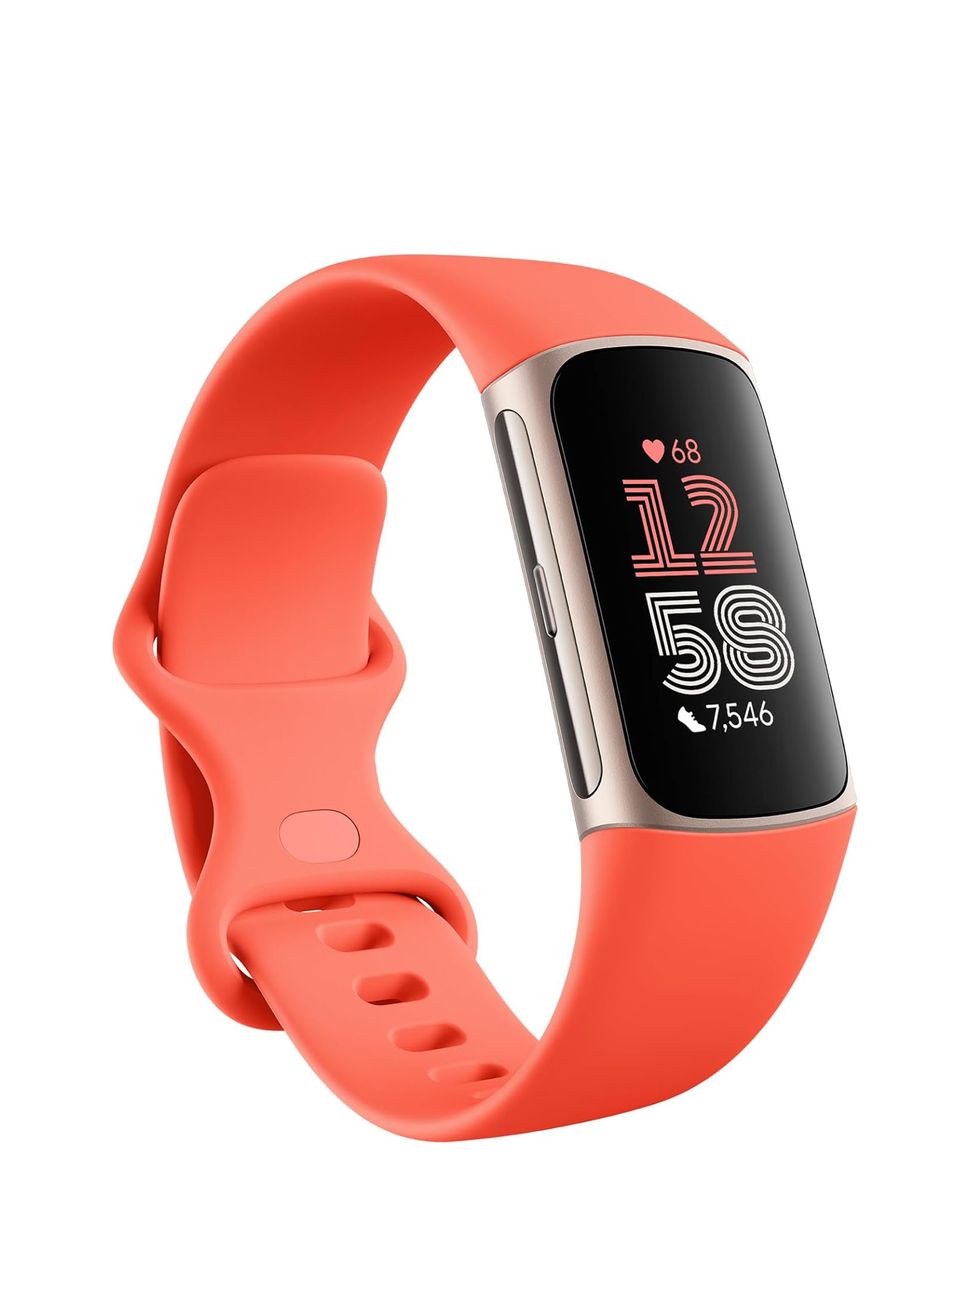 Best fitness trackers in 2023: Top activity bands from Fitbit, Garmin ...